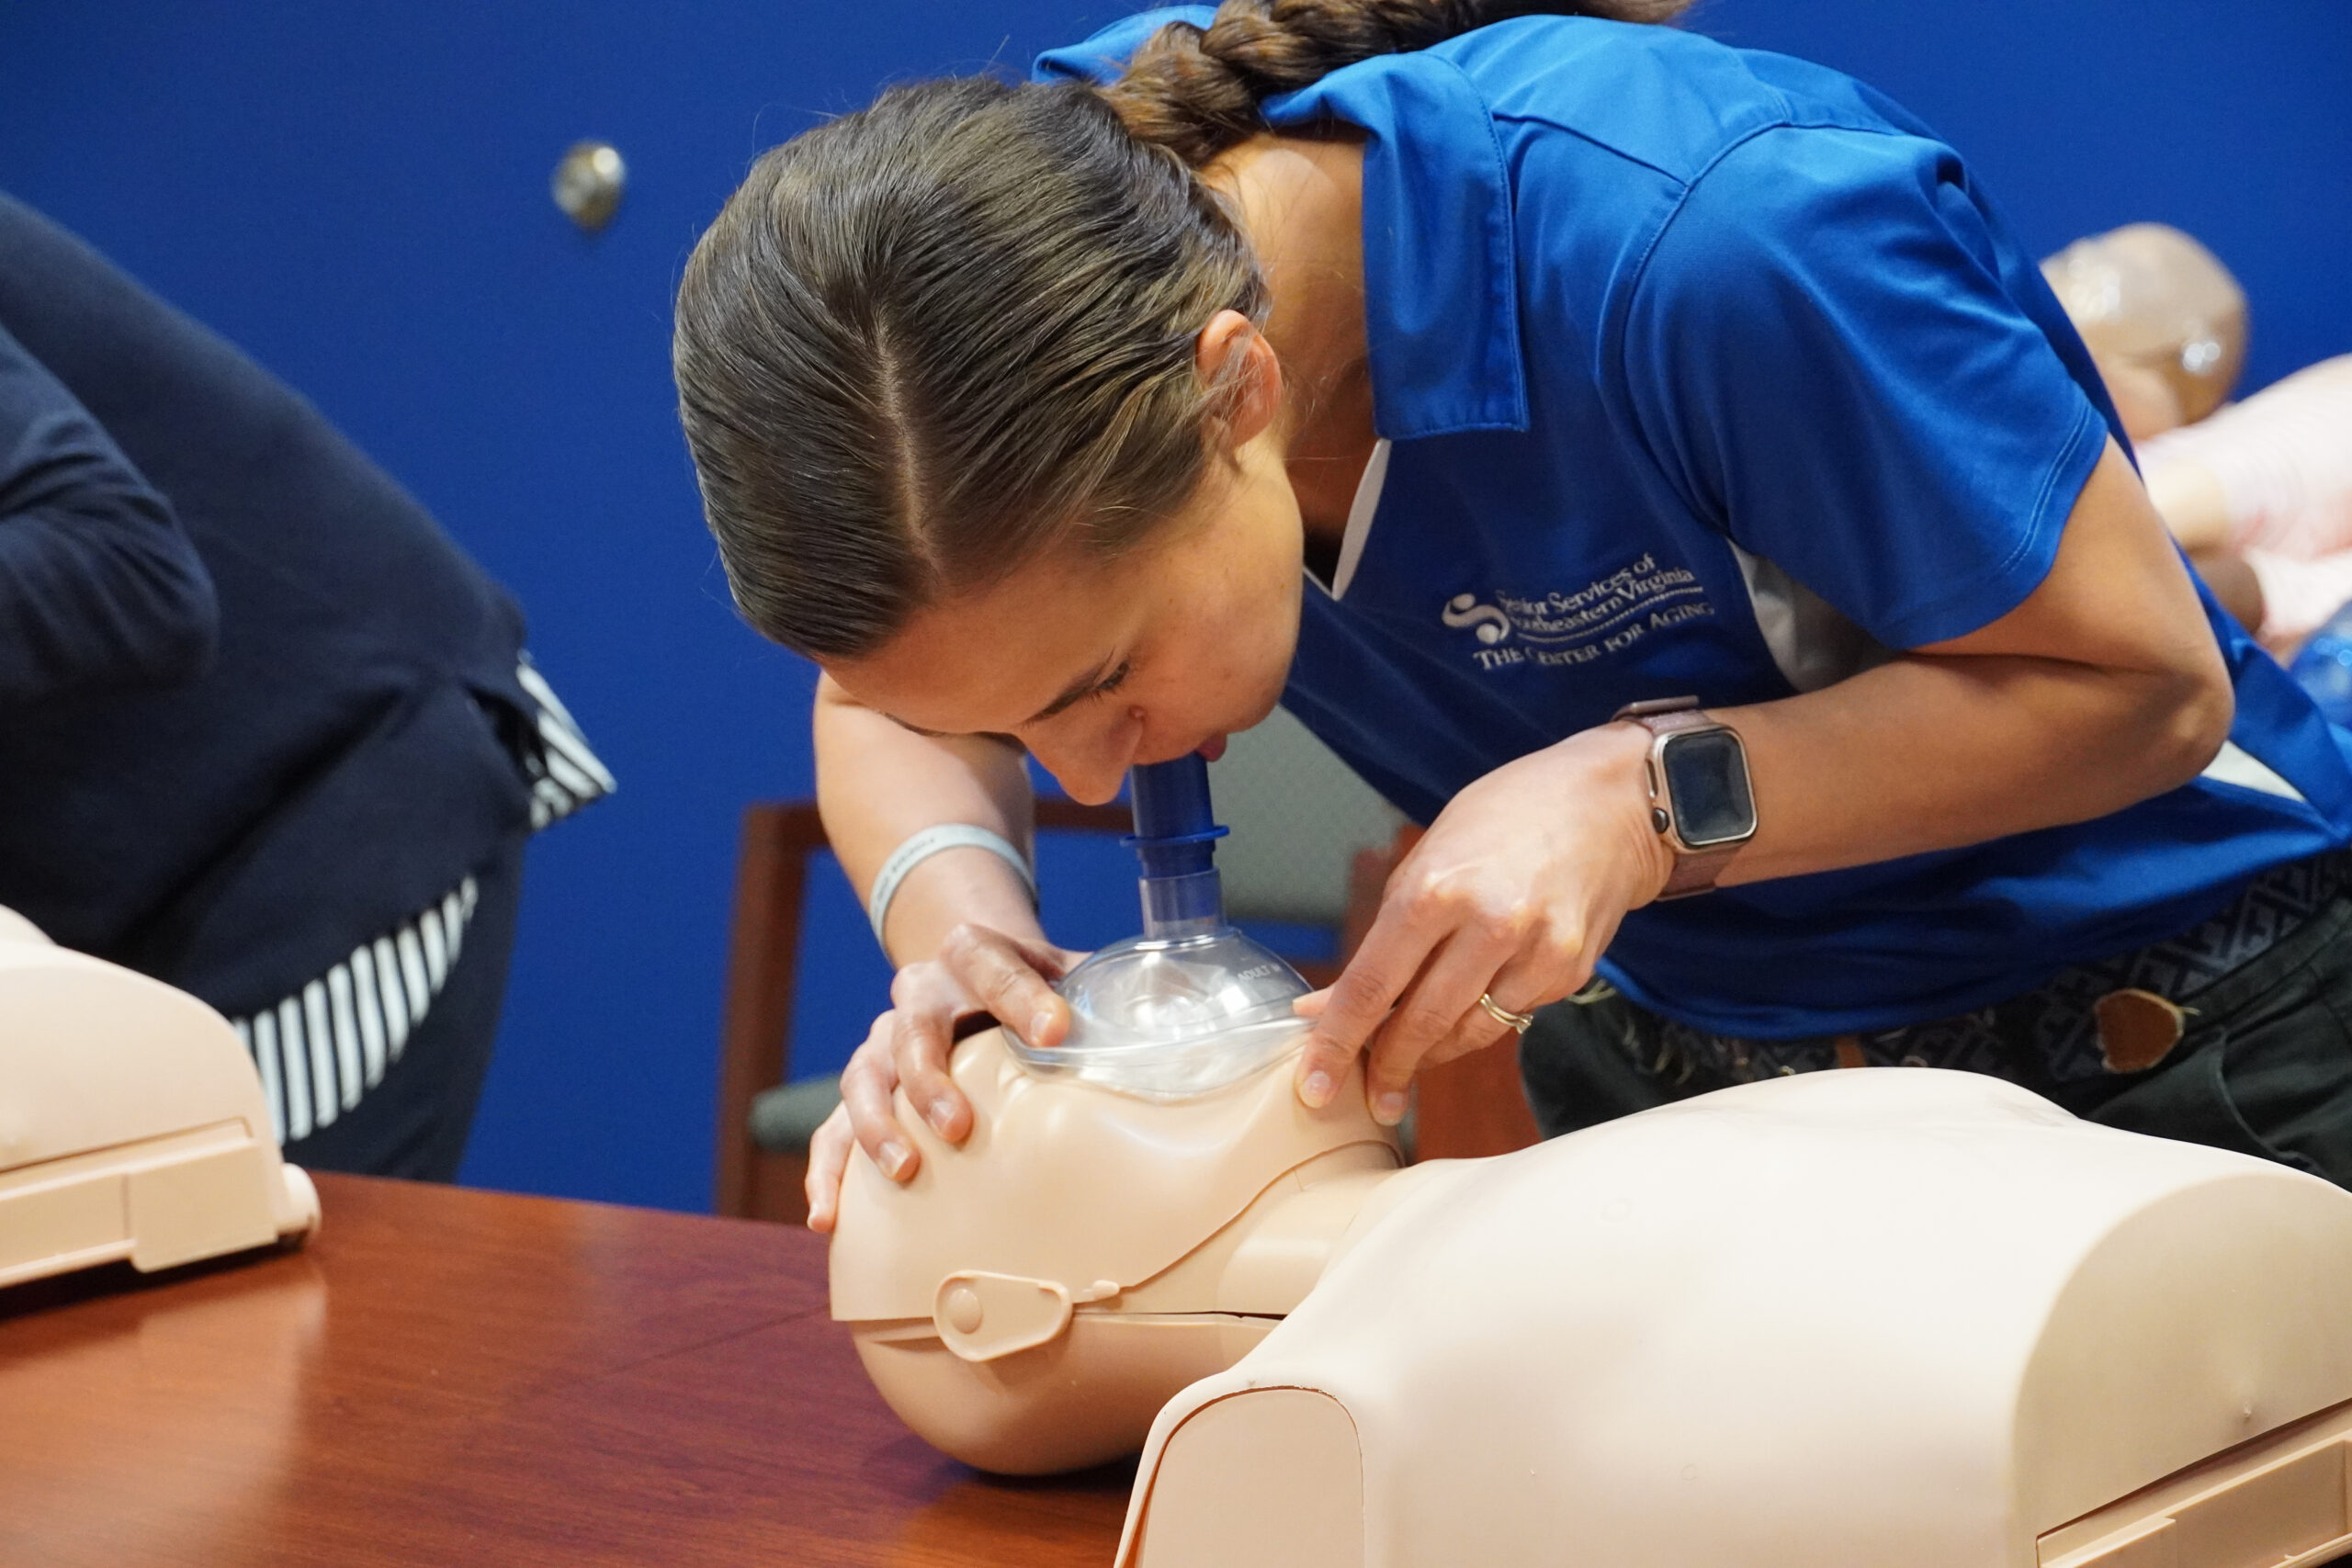 White female with blue shirt giving CPR dummy mouth to mouth